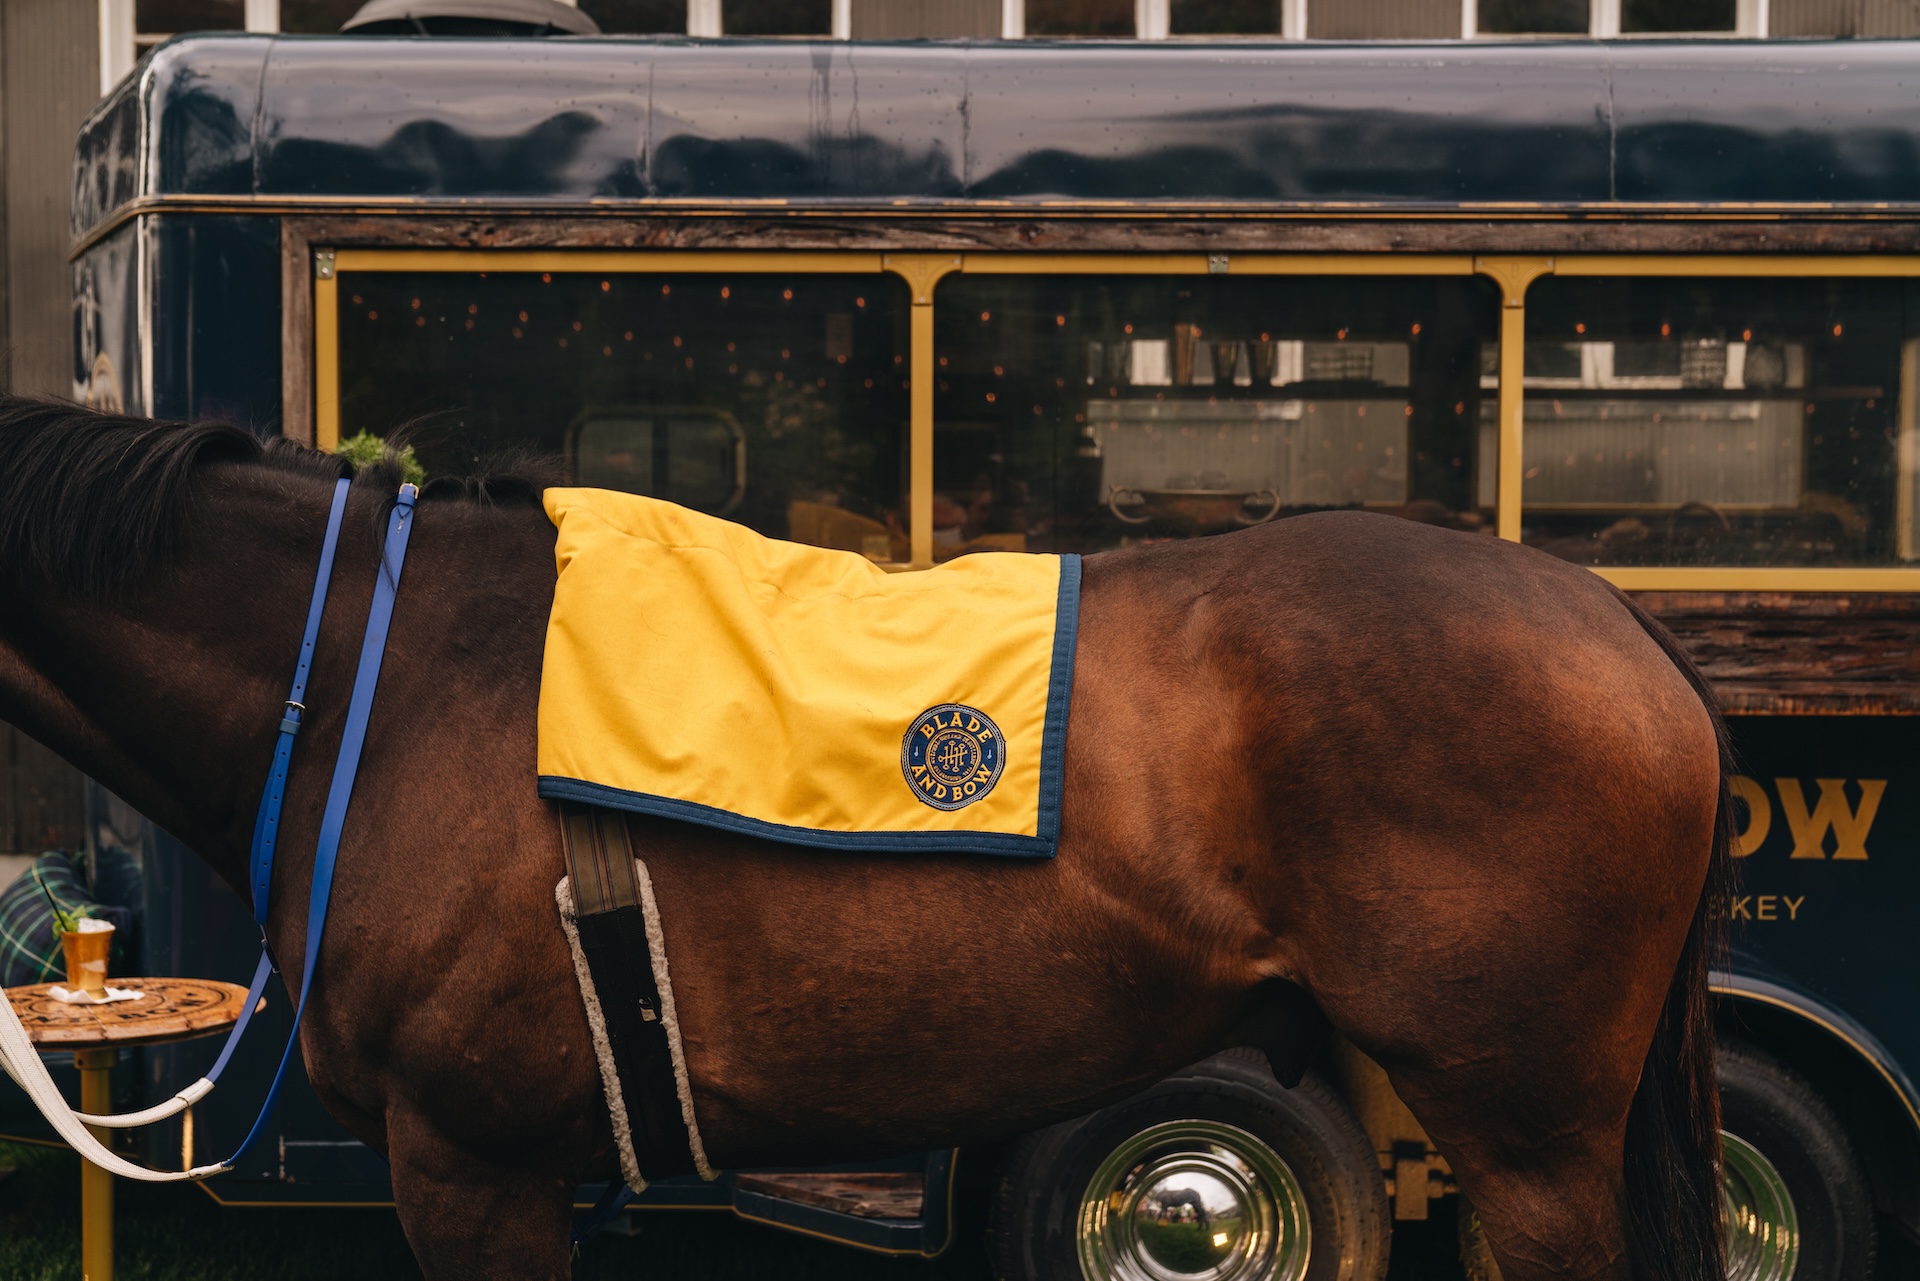 Horse’s back wearing a yellow Blade and Bow branded blanket